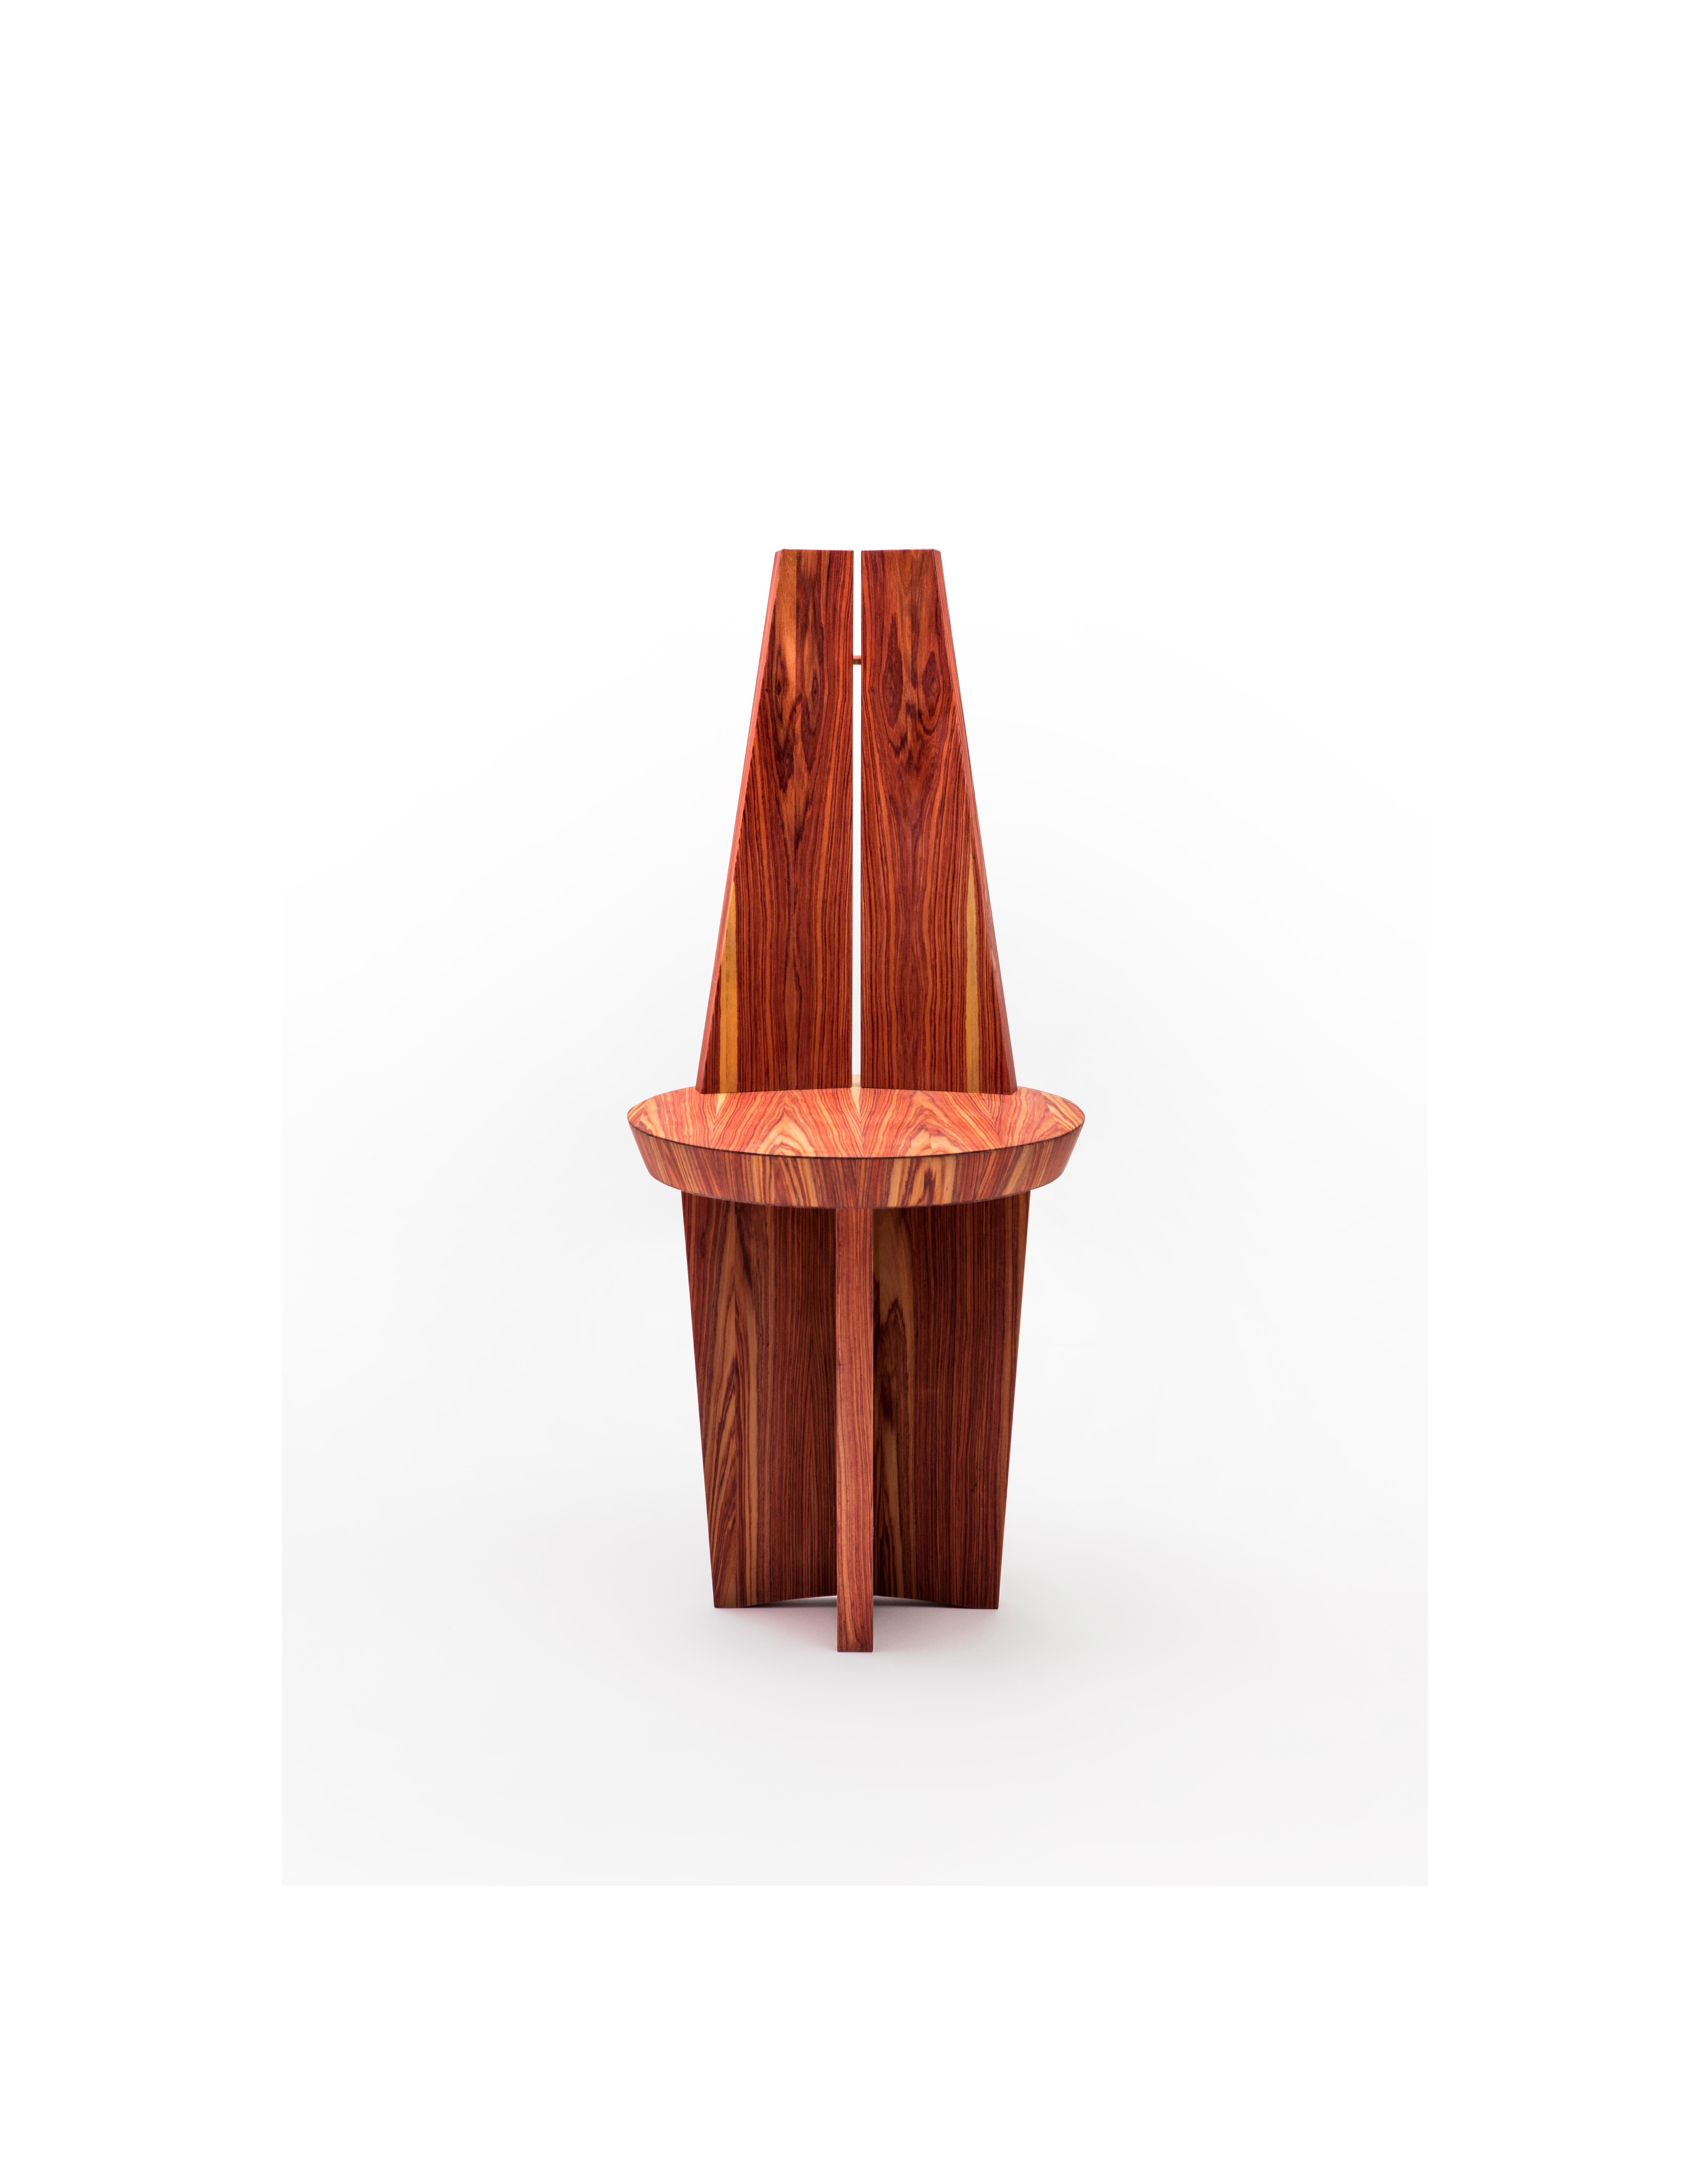 Rosewood & Copper Povera Chair by Antonio Aricò for Delvis Unlimited For Sale 1